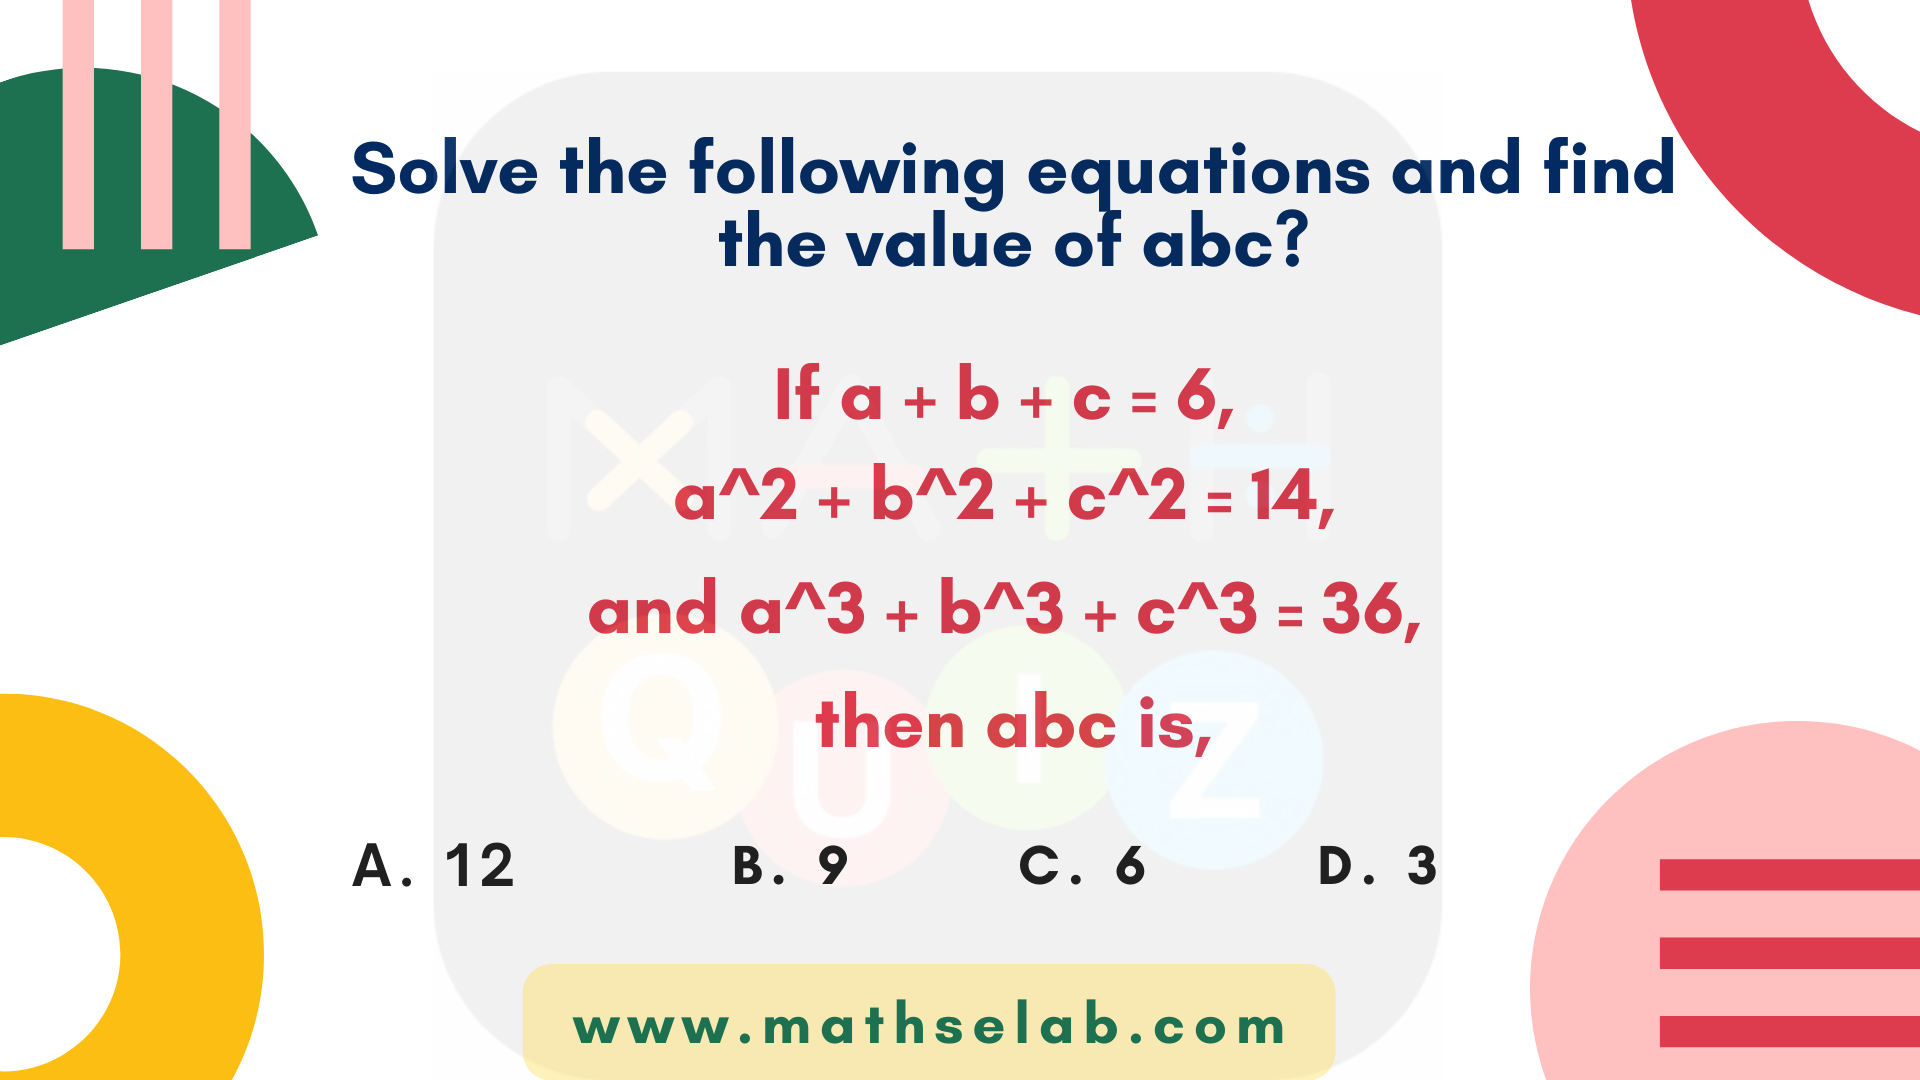 Solve the following equations and find the value of abc If a + b + c = 6, a^2 + b^2 + c^2 = 14, and a^3 + b^3 + c^3 = 36, then abc is, - www.mathselab.com